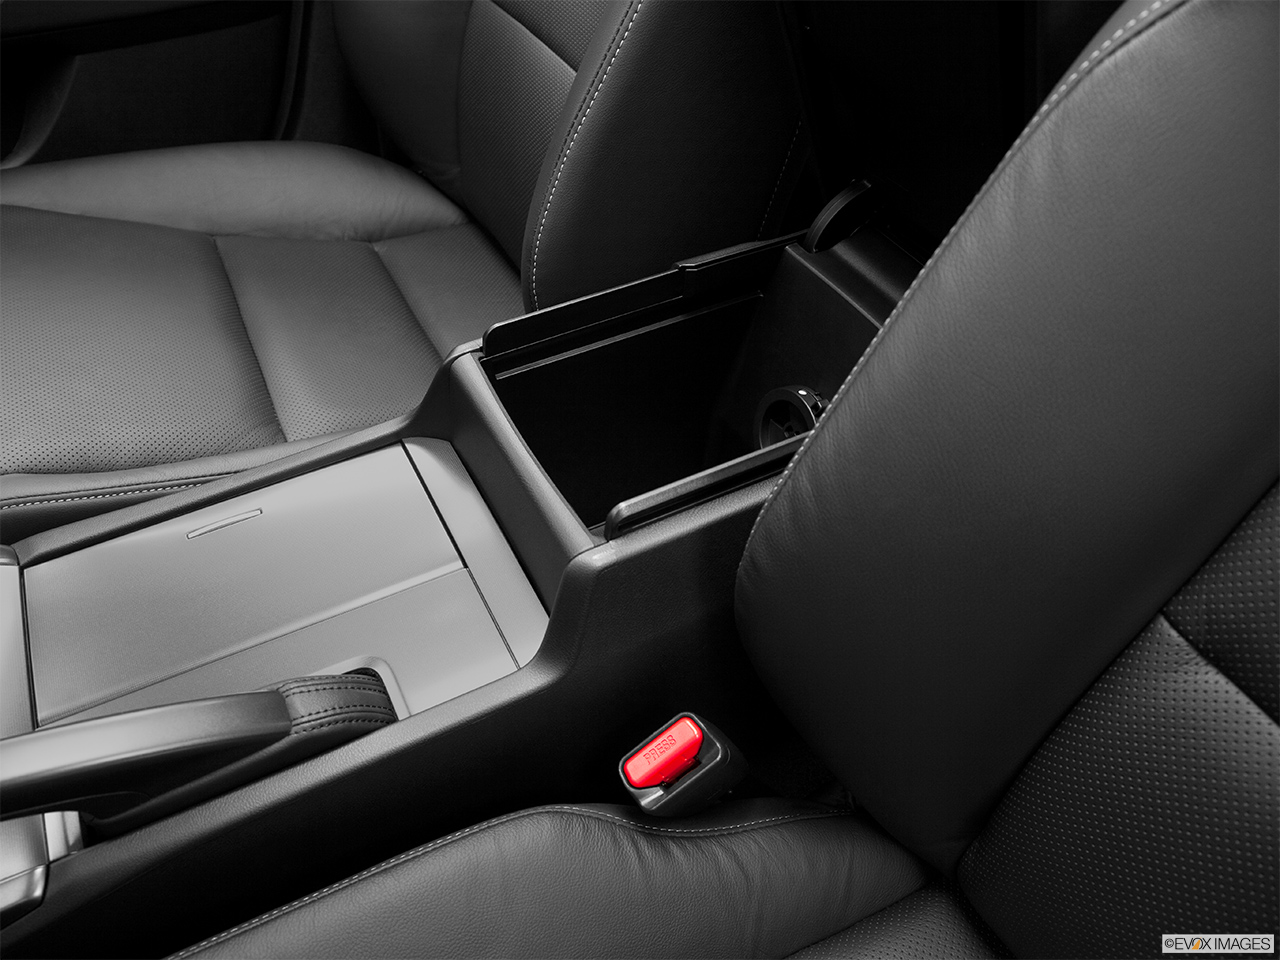 2013 Acura TSX 5-Speed Automatic Front center divider. 